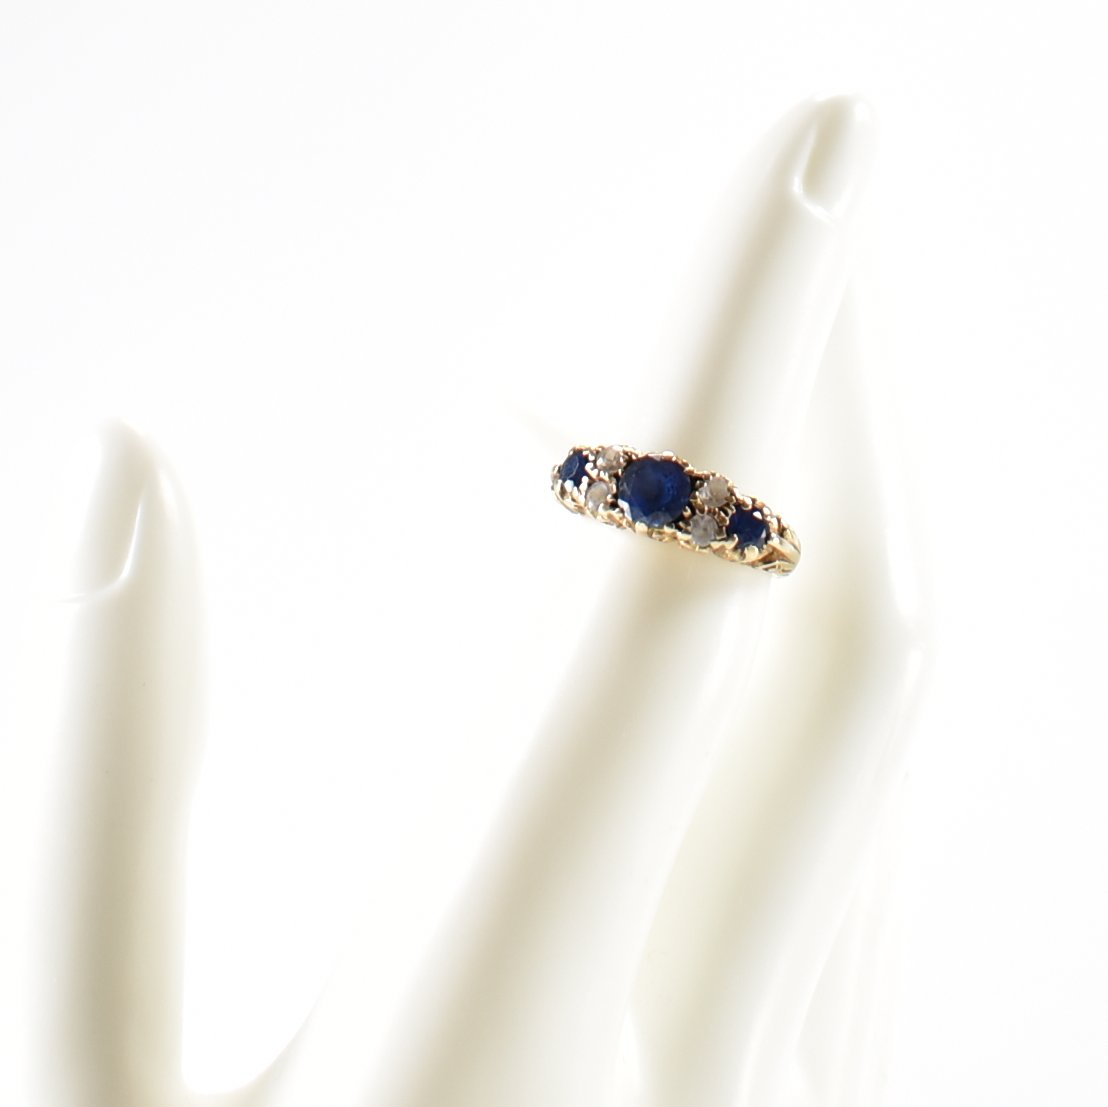 HALLMARKED 9CT GOLD BLUE & WHITE STONE RING - Image 8 of 8